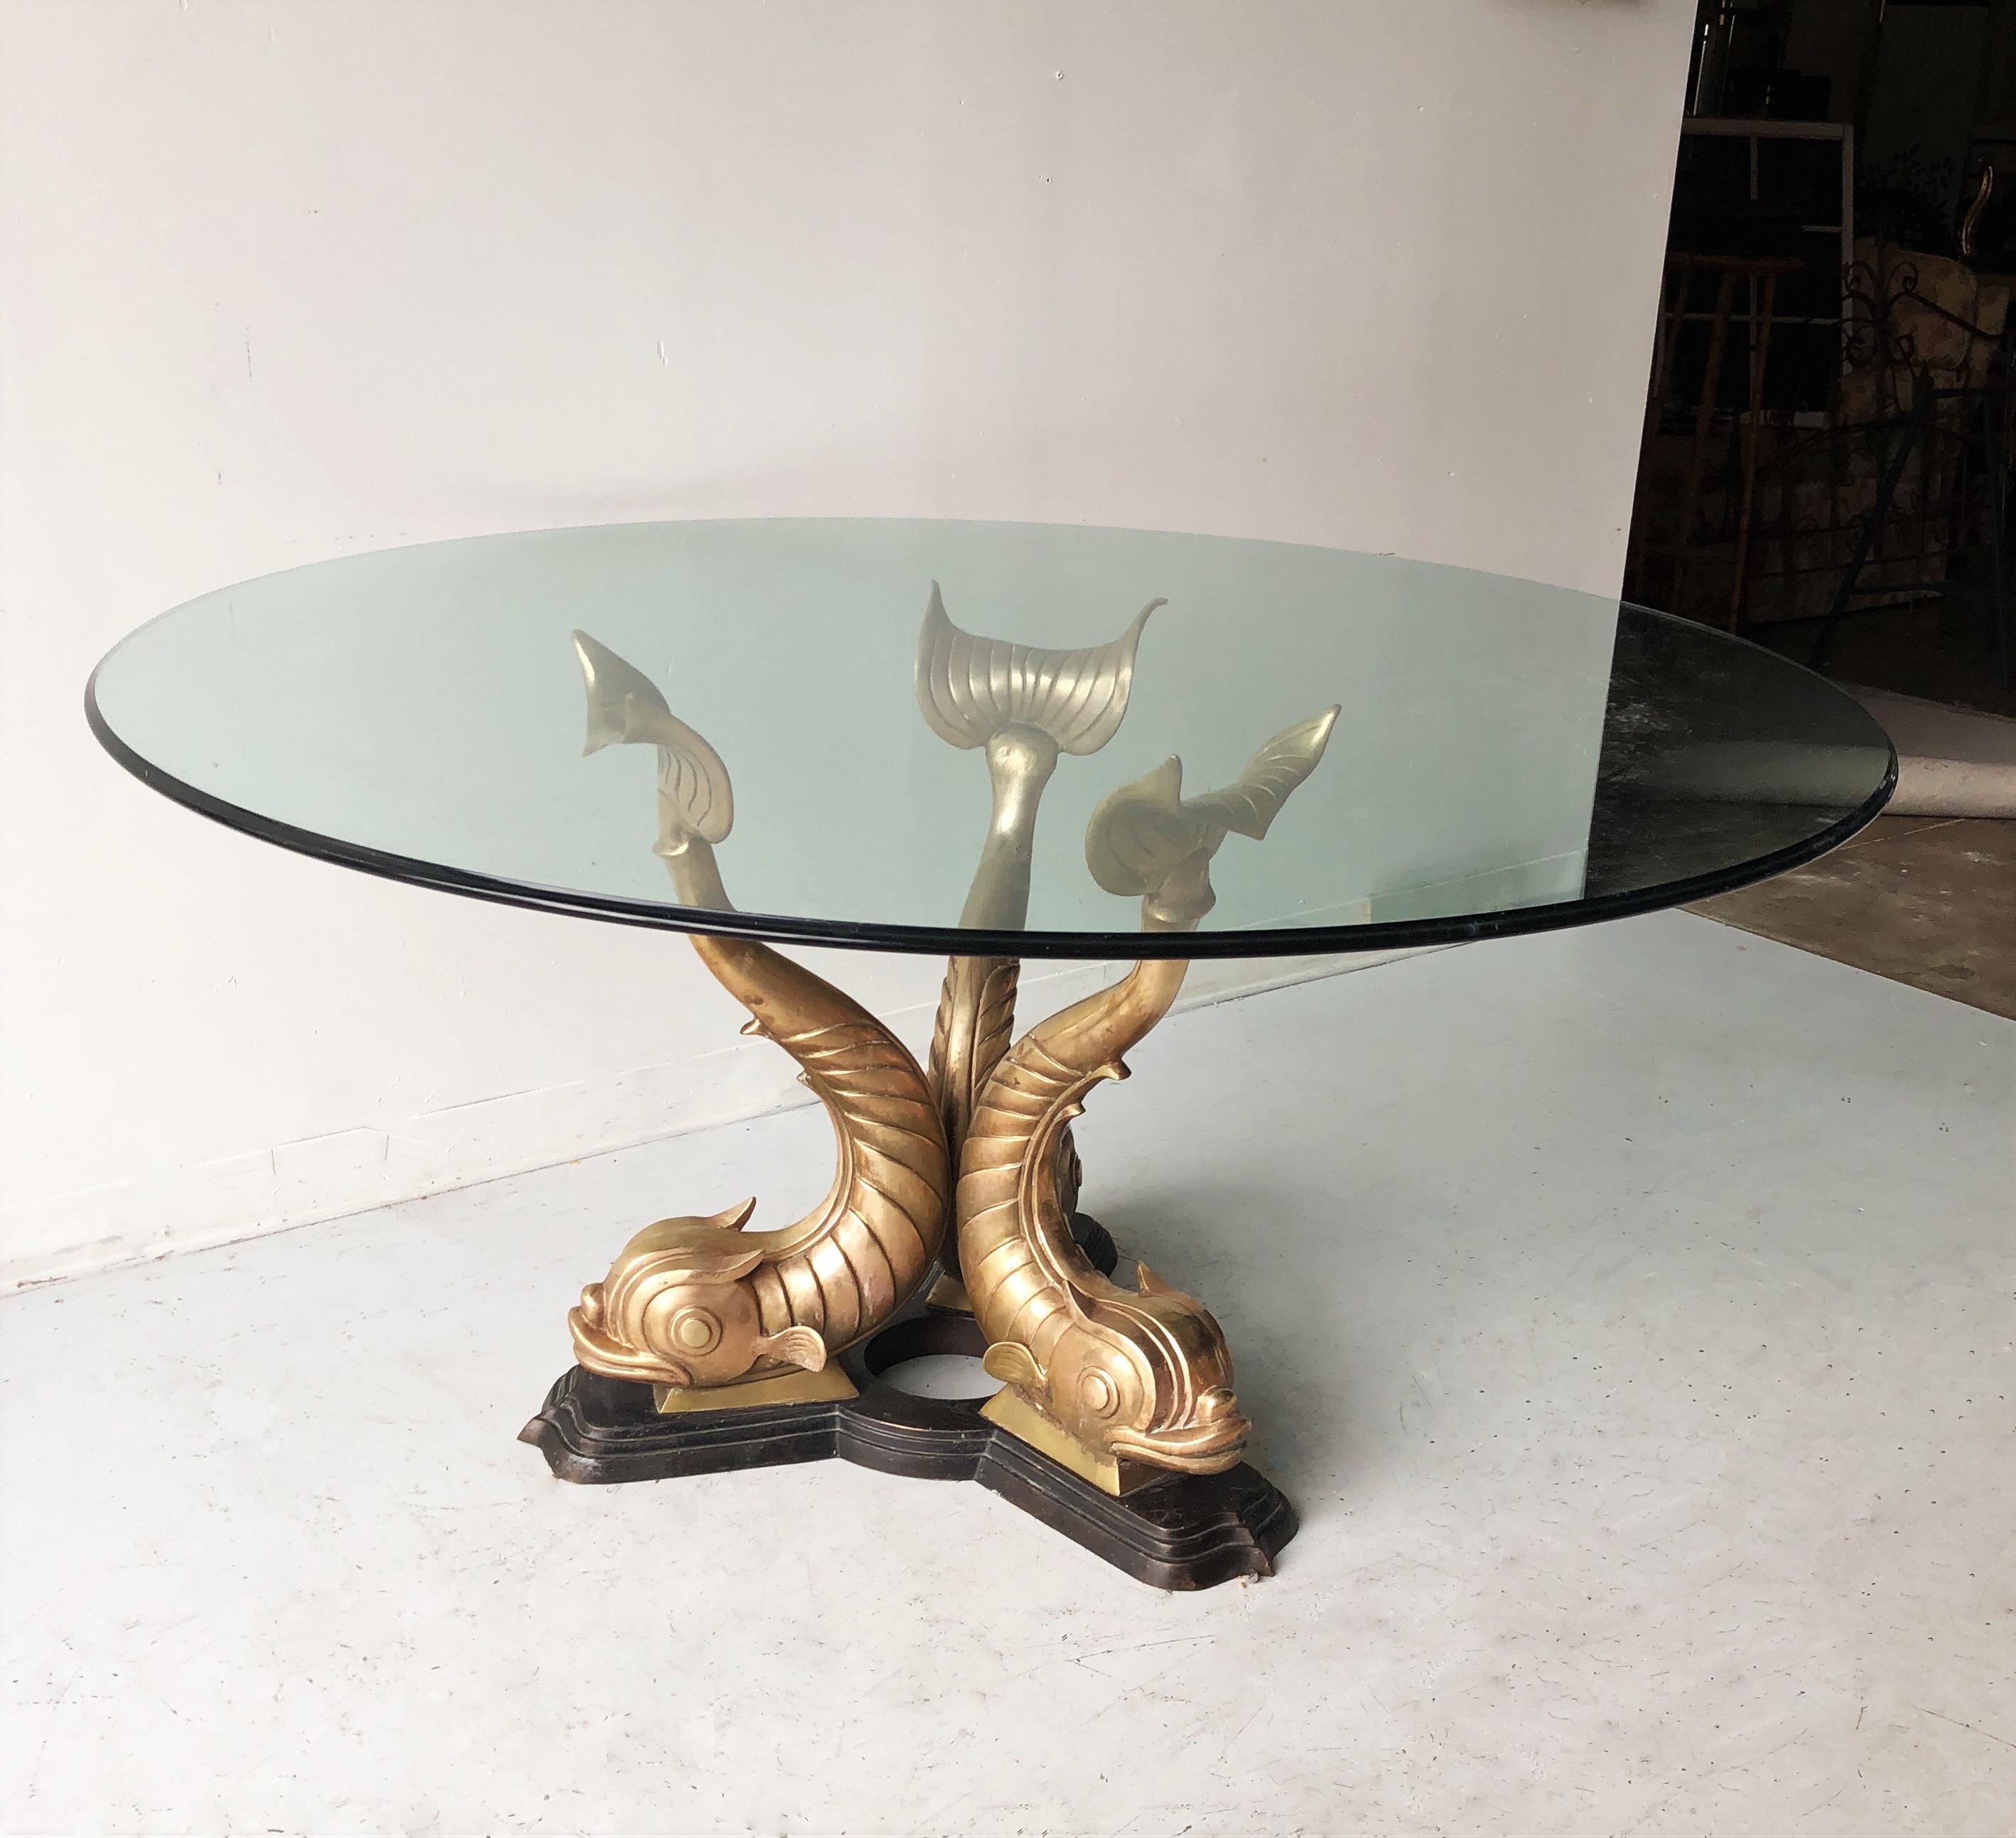 Incredible koi fish dining table. Table base depicts three sculptural brass Koi fish resting on a bronze base. Made in Italy. Extremely heavy and sturdy base that can withstand a very large heavy piece of glass. It does not come with glass, but we